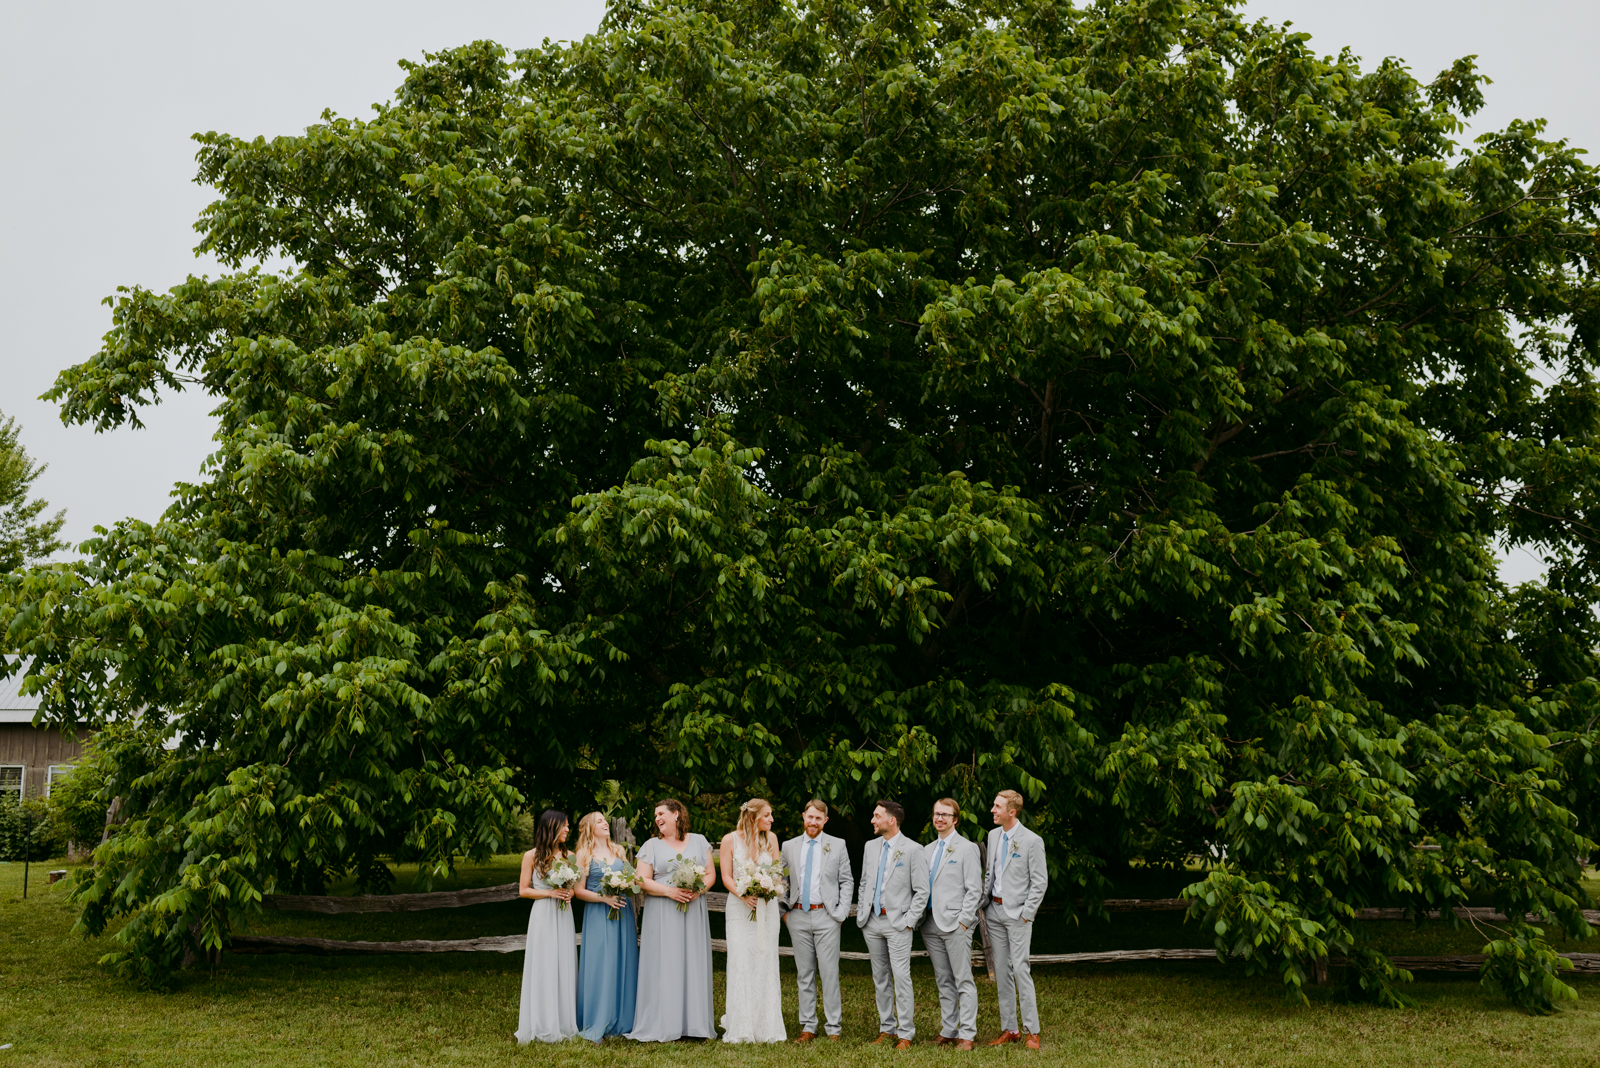 wedding party standing under big tree by wooden fence